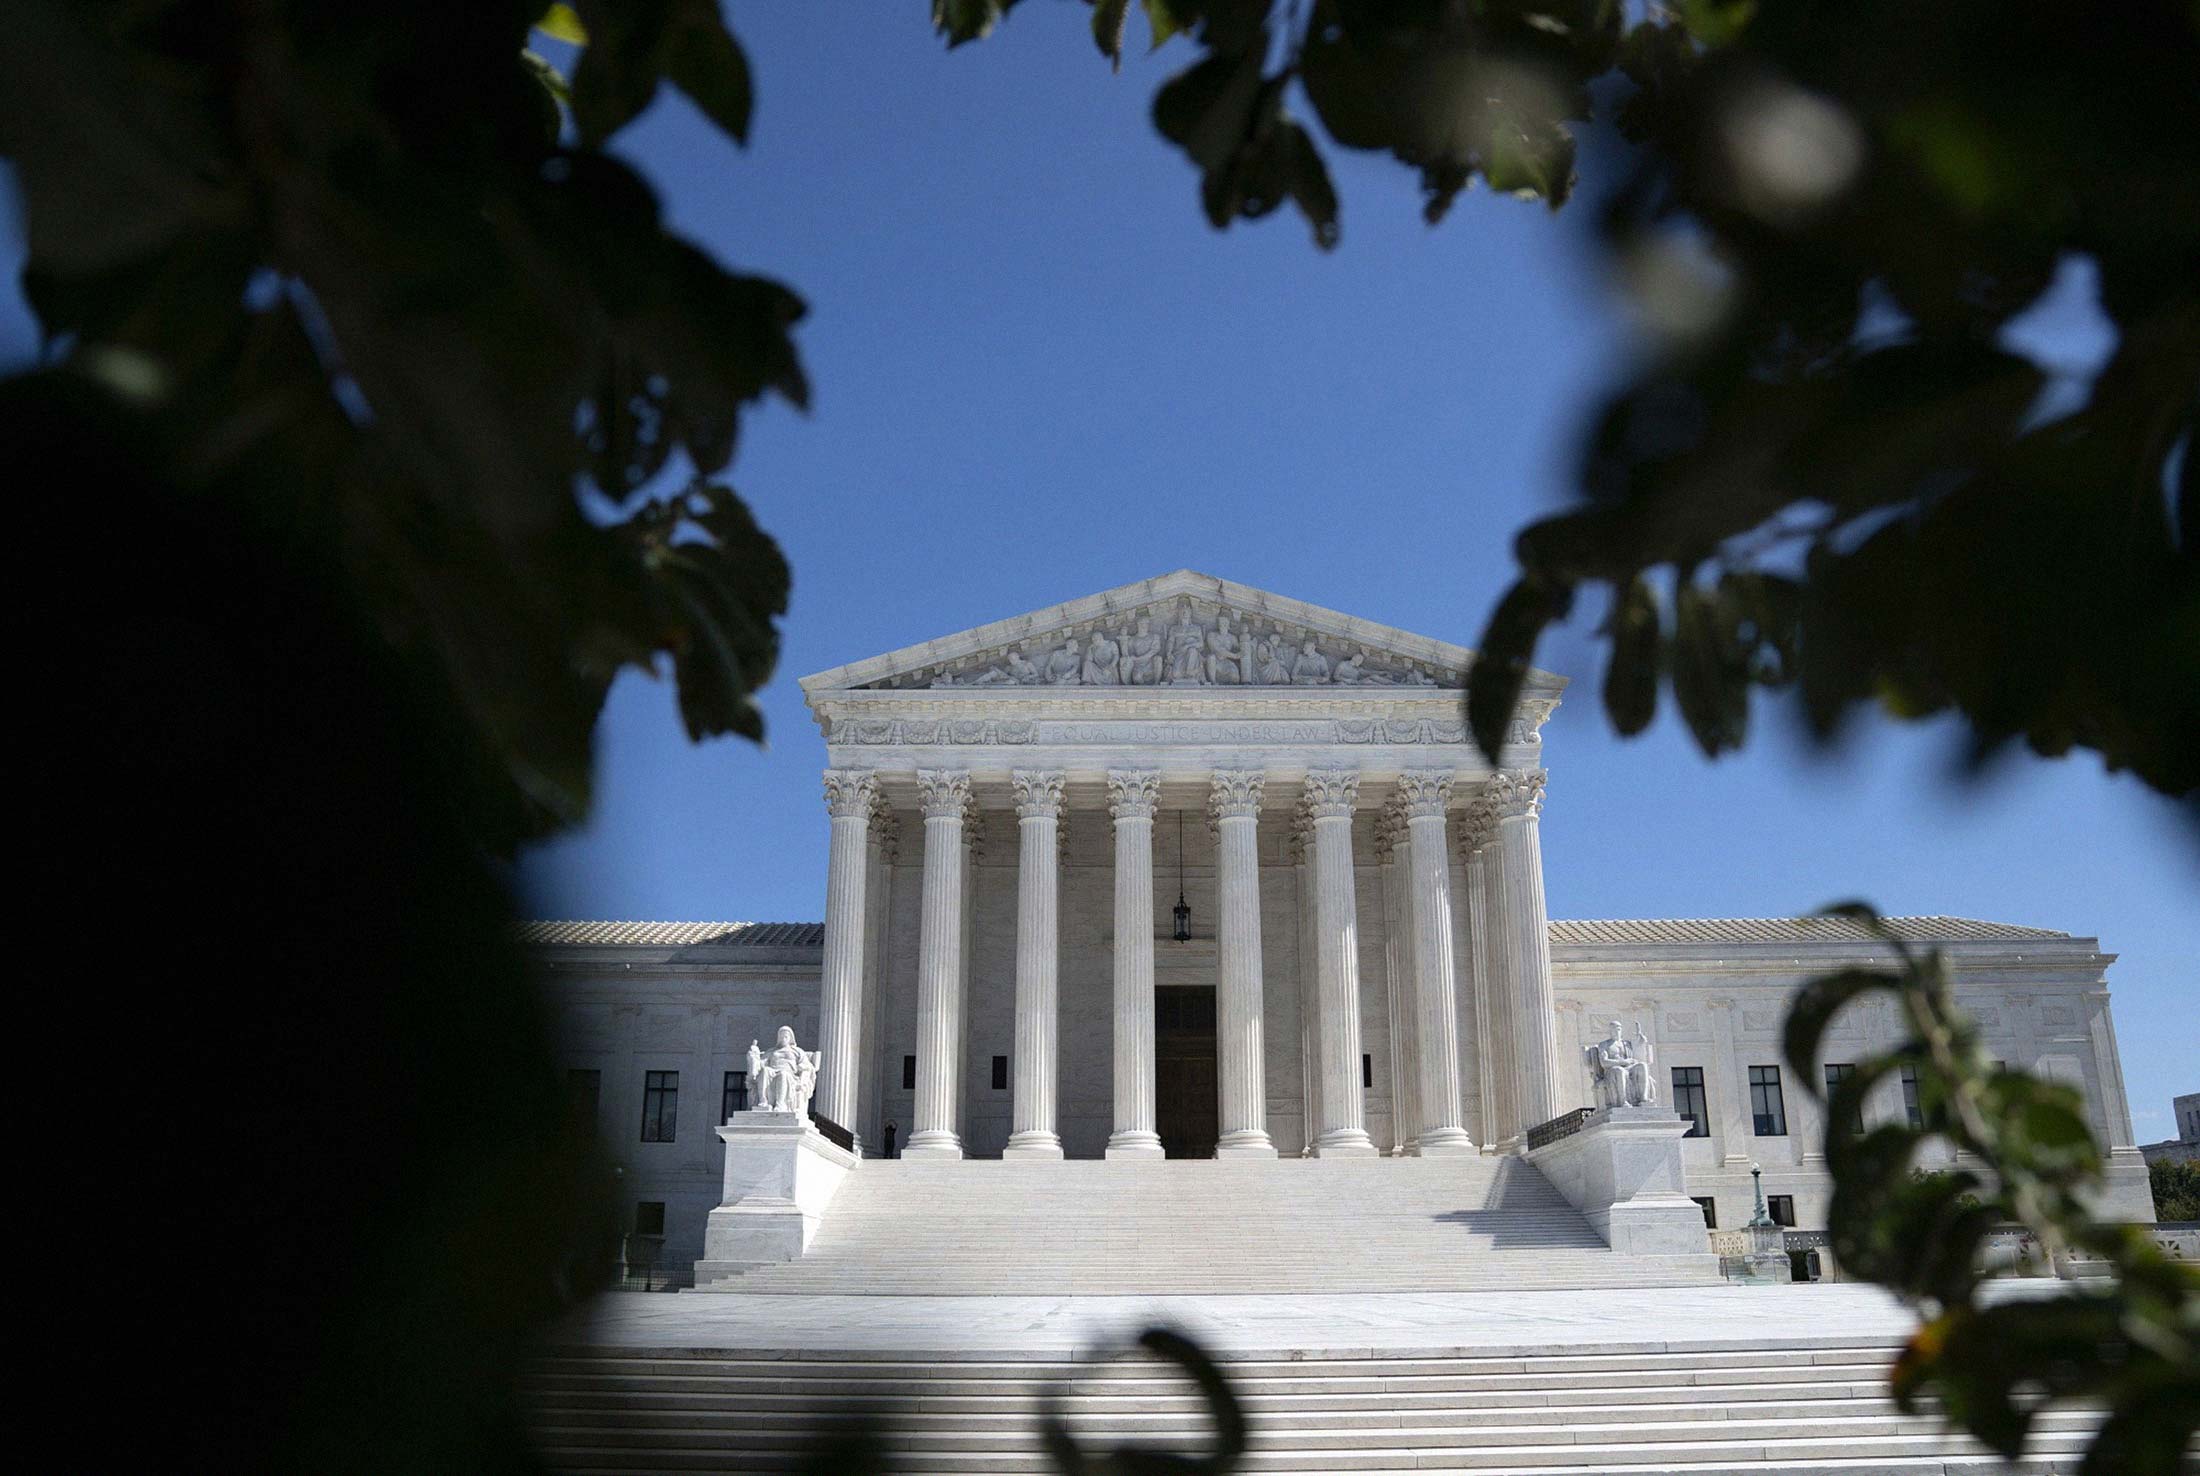 Google and Oracle faced off at the U.S. Supreme Court on April 7 in a multibillion-dollar copyright dispute.